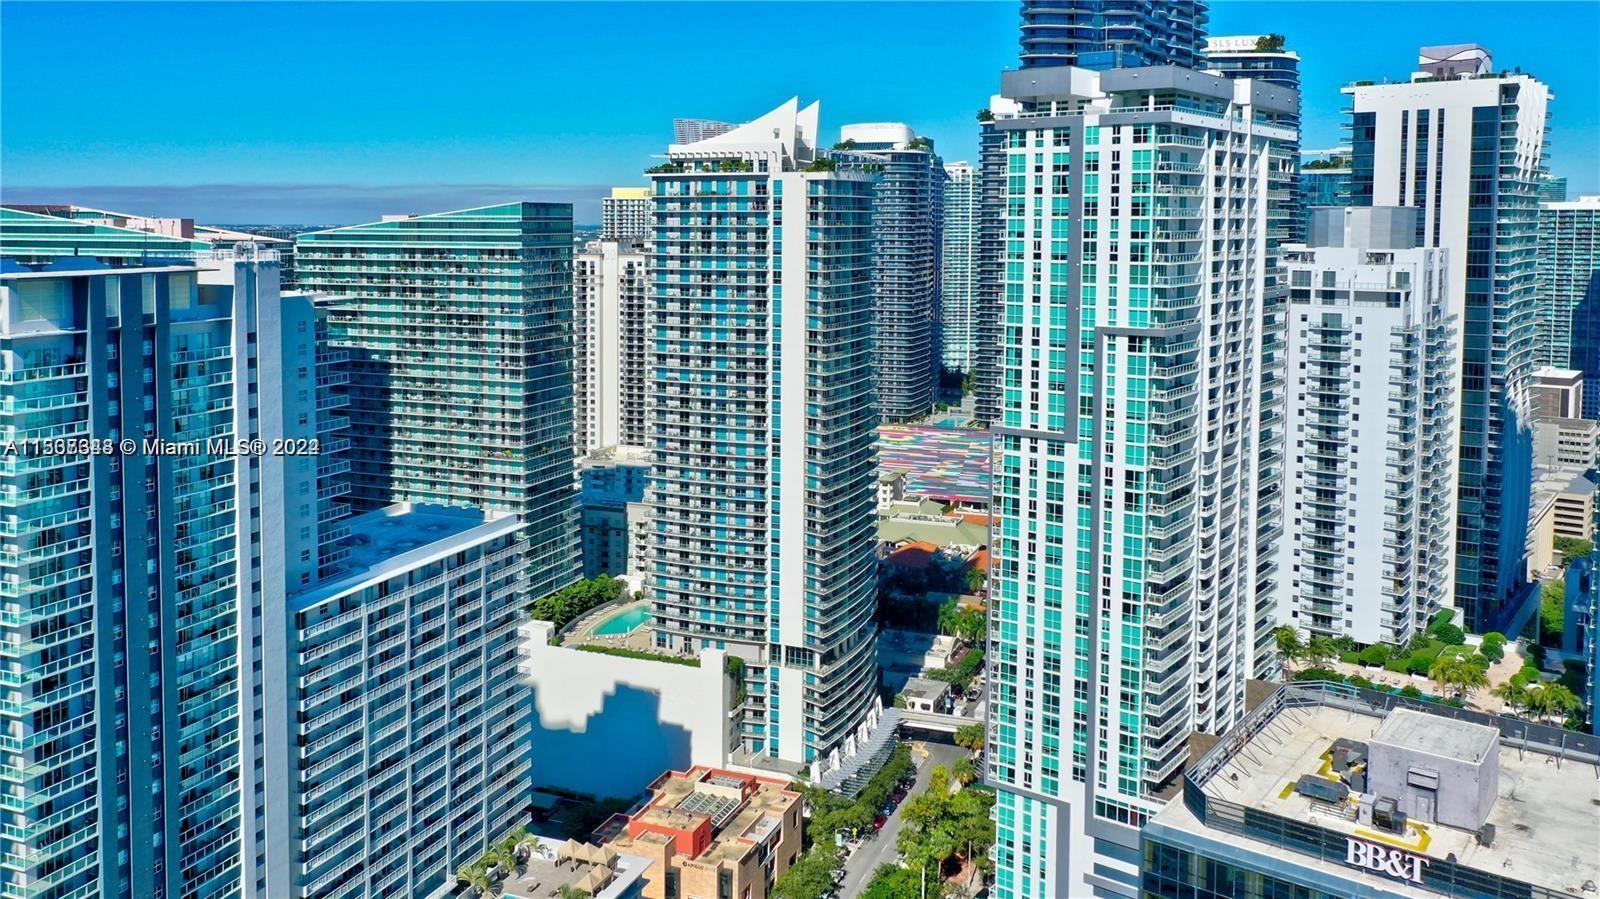 This is a beautiful and the largest One bedroom plus Den unit with a great view to the Bay and city and a lot of
natural light. Located in heart of Mary Brickell Village, great restaurants, boutiques and next to the metro mover.
In the 9th floor you can find the pool, sauna, gym, club room, cinema and kids room. In the 43rd floor there is a
game room, and a roof tub pool. GORGEOUS BUILDING IN THE HEART OF BRICKELL. THIS IS THE LARGEST 1
BEDROOM+ DEN, 1 BATH UNIT IN THE BLDG. UNIT HAS A GOURMET KITCHEN THAT INCLUDES ITALIAN
CABINETRY, STONE COUNTERTOPS, & PREMIUM APPLIANCES. MODERN BATHROOM WITH TUB AND LAMINATED
FLOORING. LAUNDRY CLOSET WITH WASHER/DRYER IN THE UNIT. AMENITIES INCLUDE ROOFTOP POOL, FITNESS
CENTER, MOVIE THEATER, KID'S PLAYROOM, VALET PARKING AND MUCH MORE.